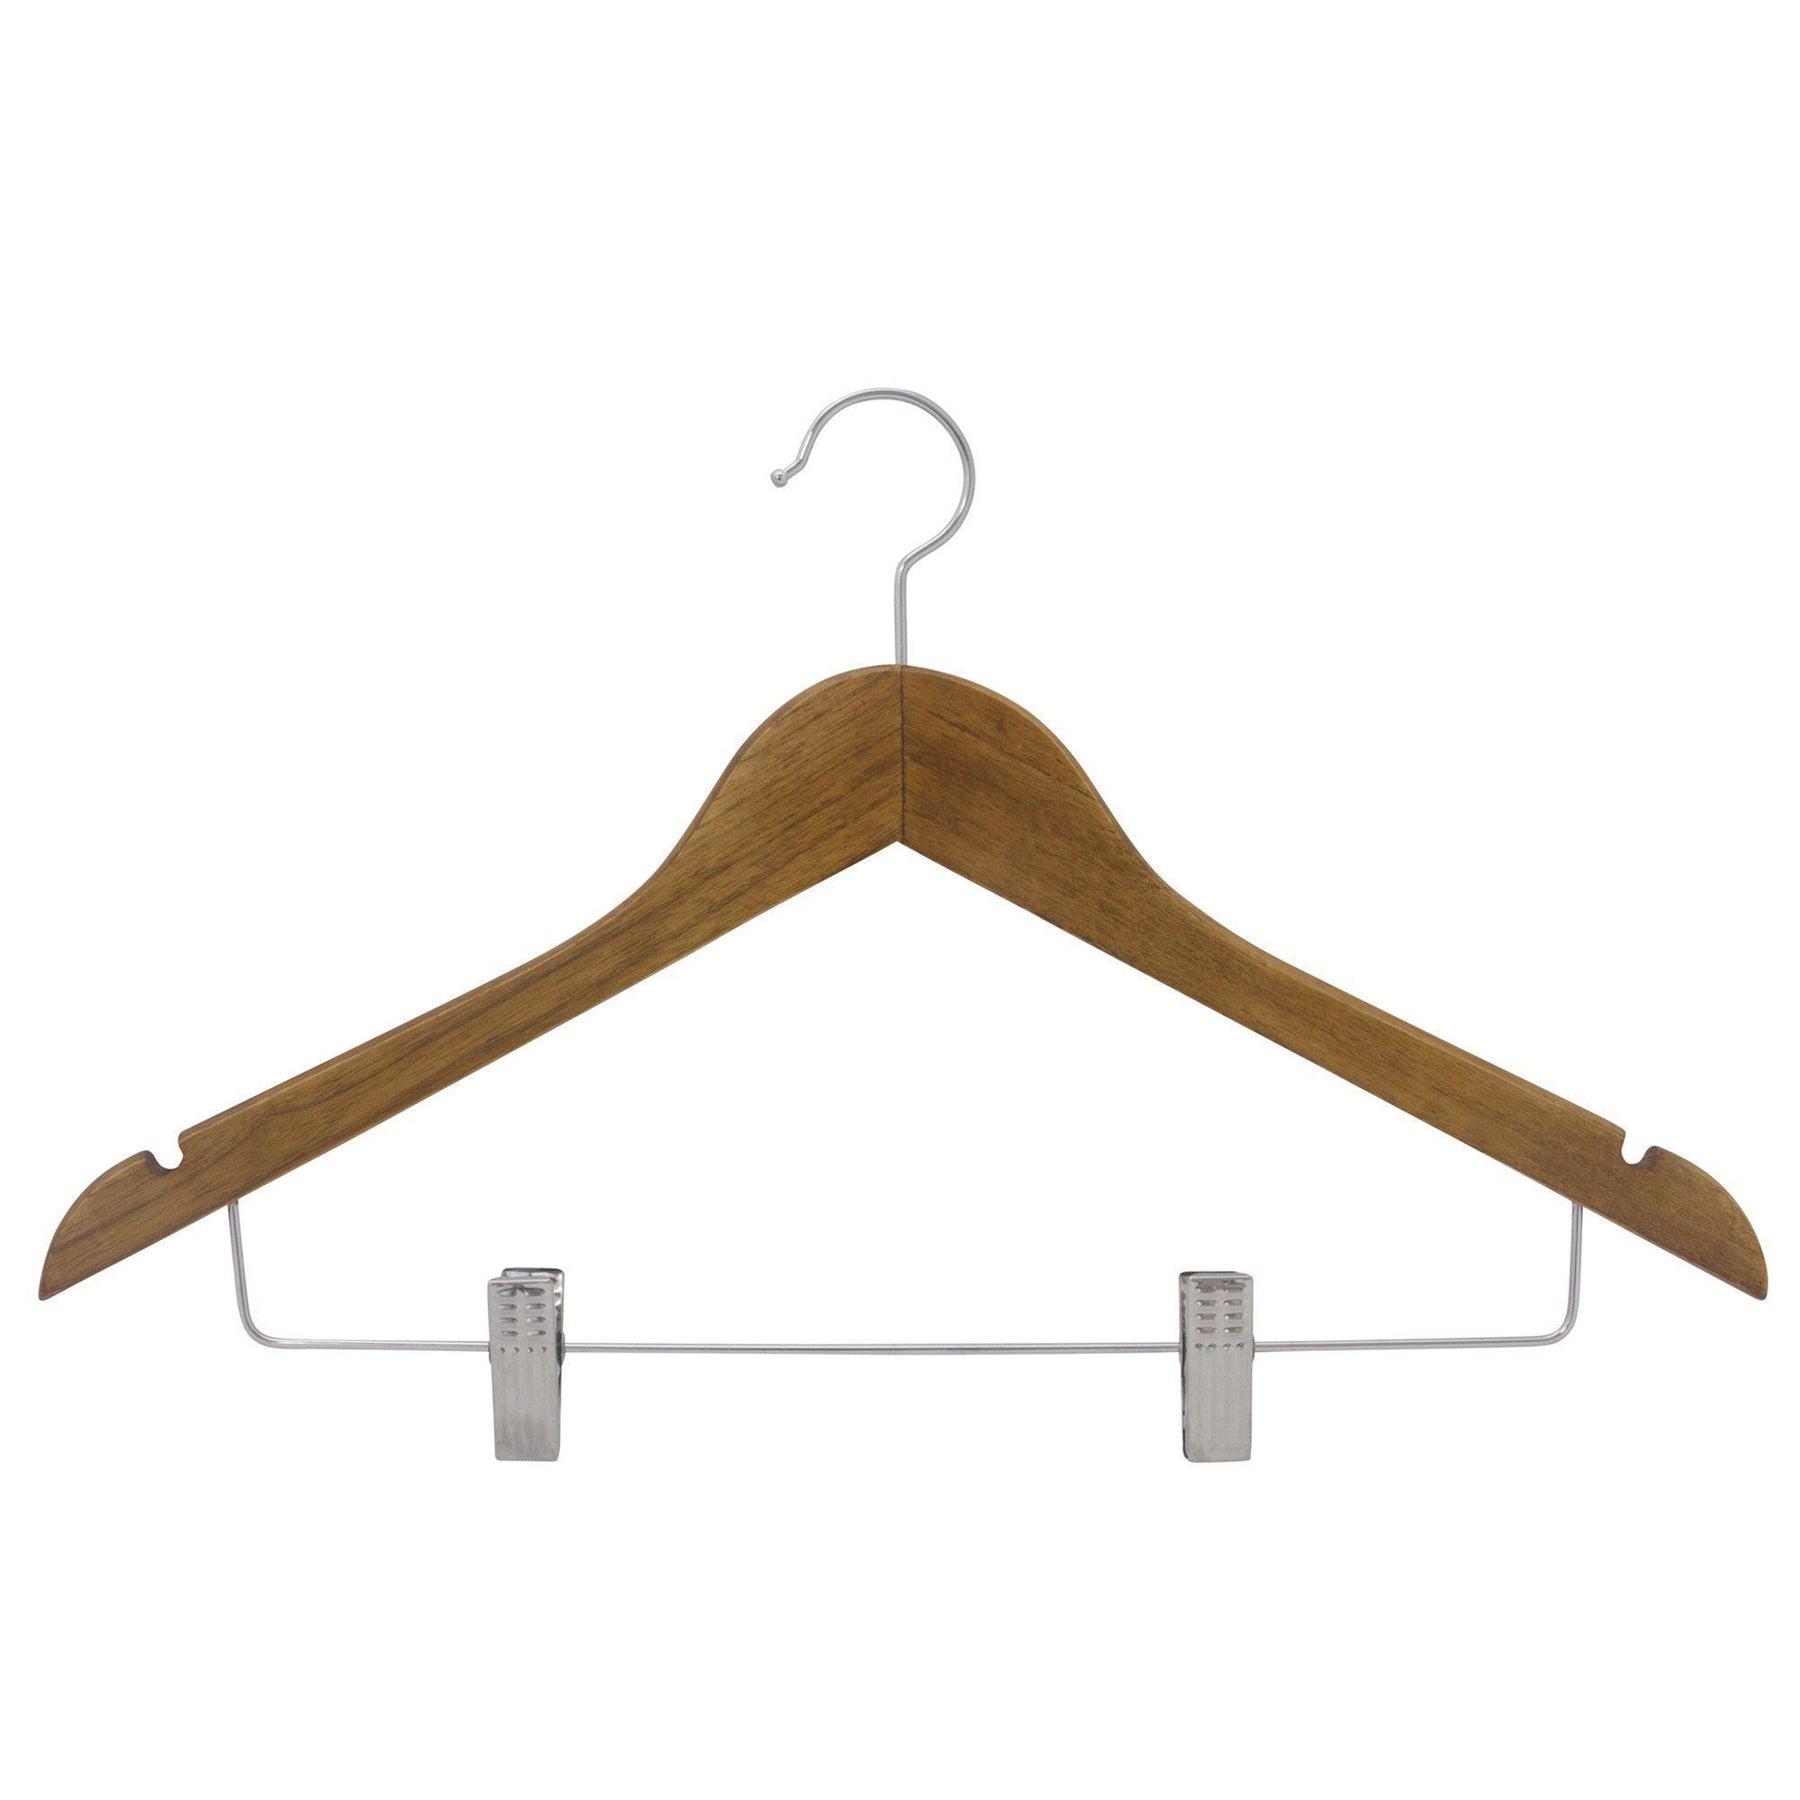 https://cdn.shopify.com/s/files/1/2993/5404/products/closet-complete-wood-hangers-premium-wooden-suits-pants-skirt-hangers-with-clips-79629-7162118996053_1800x1800.jpg?v=1552520136